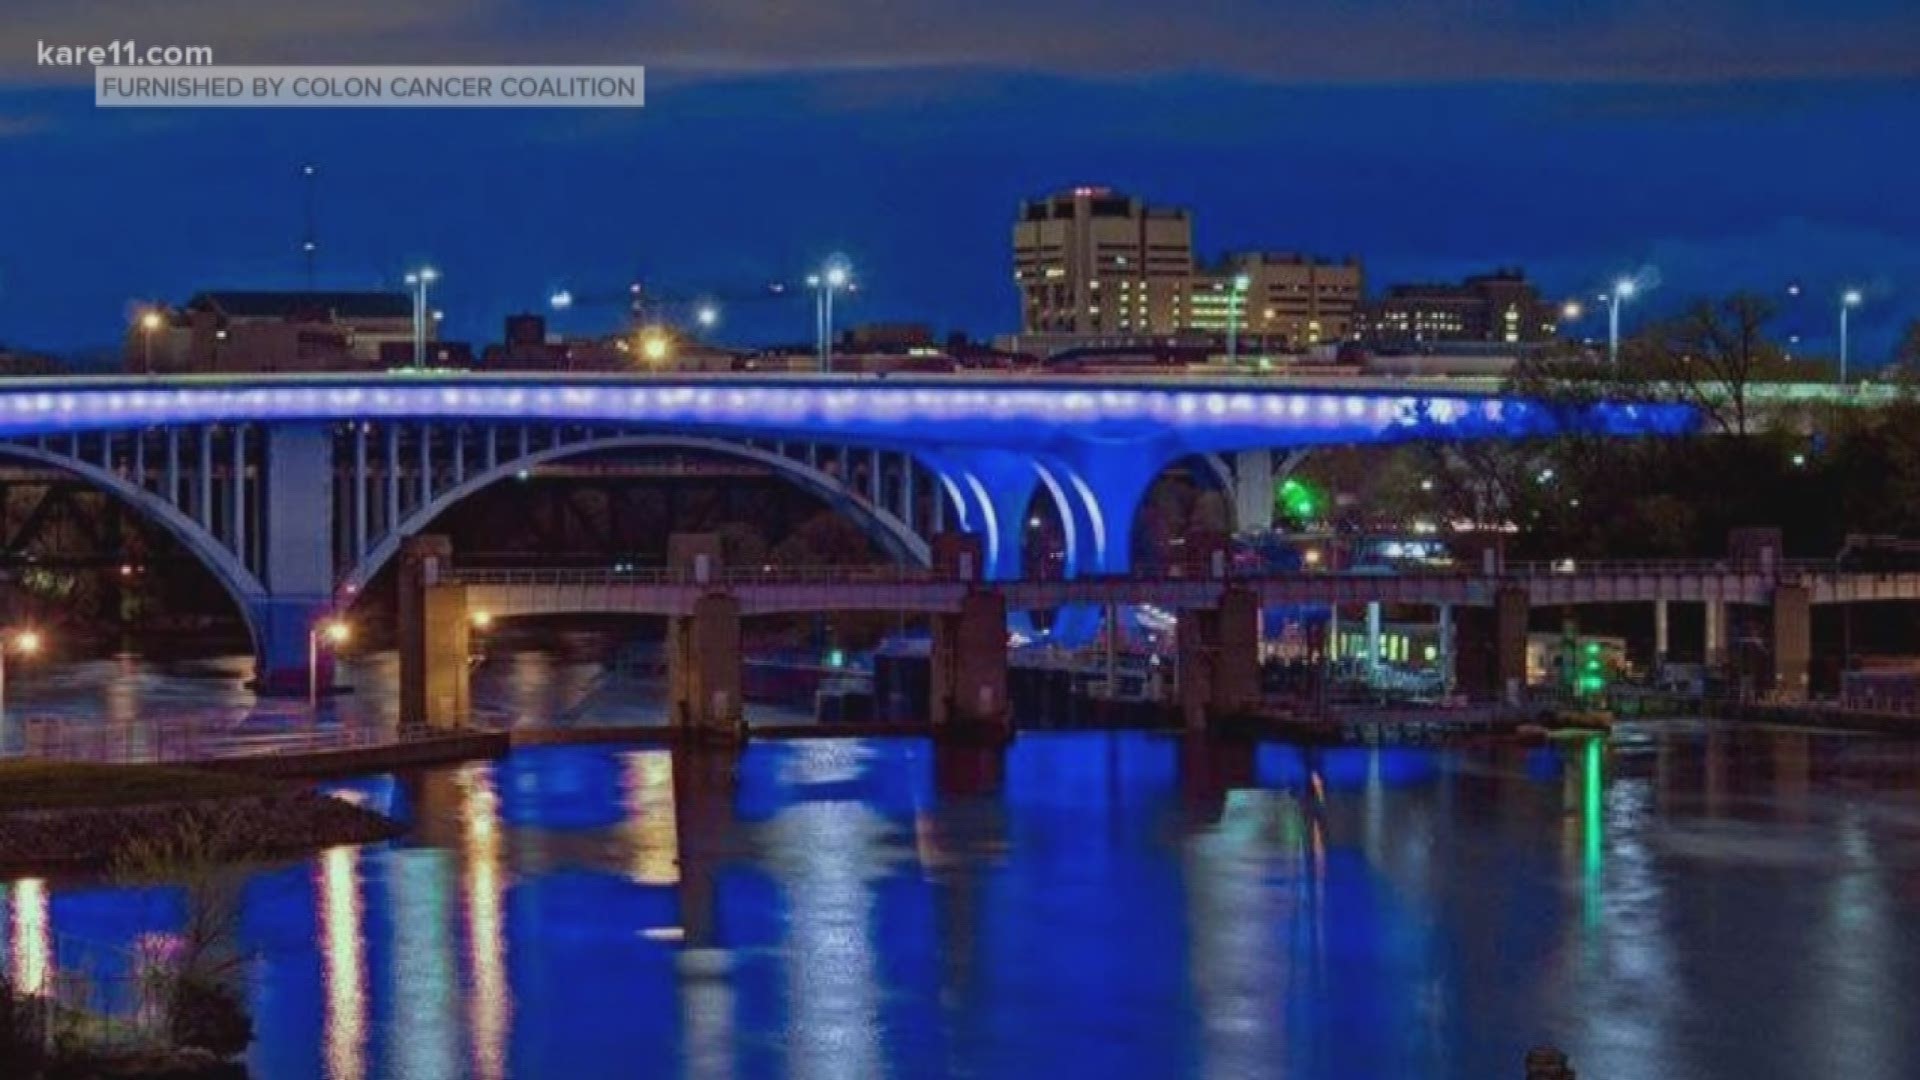 March is Colorectal Cancer Awareness Month. In recognition, landmarks and buildings across the state, including Target Field, the IDS Center, Enger Tower in Duluth, Lincoln Plaza in St. Cloud, and more, will shine blue from dusk to dawn on Tuesday, March 5. https://kare11.tv/2VrWLCM